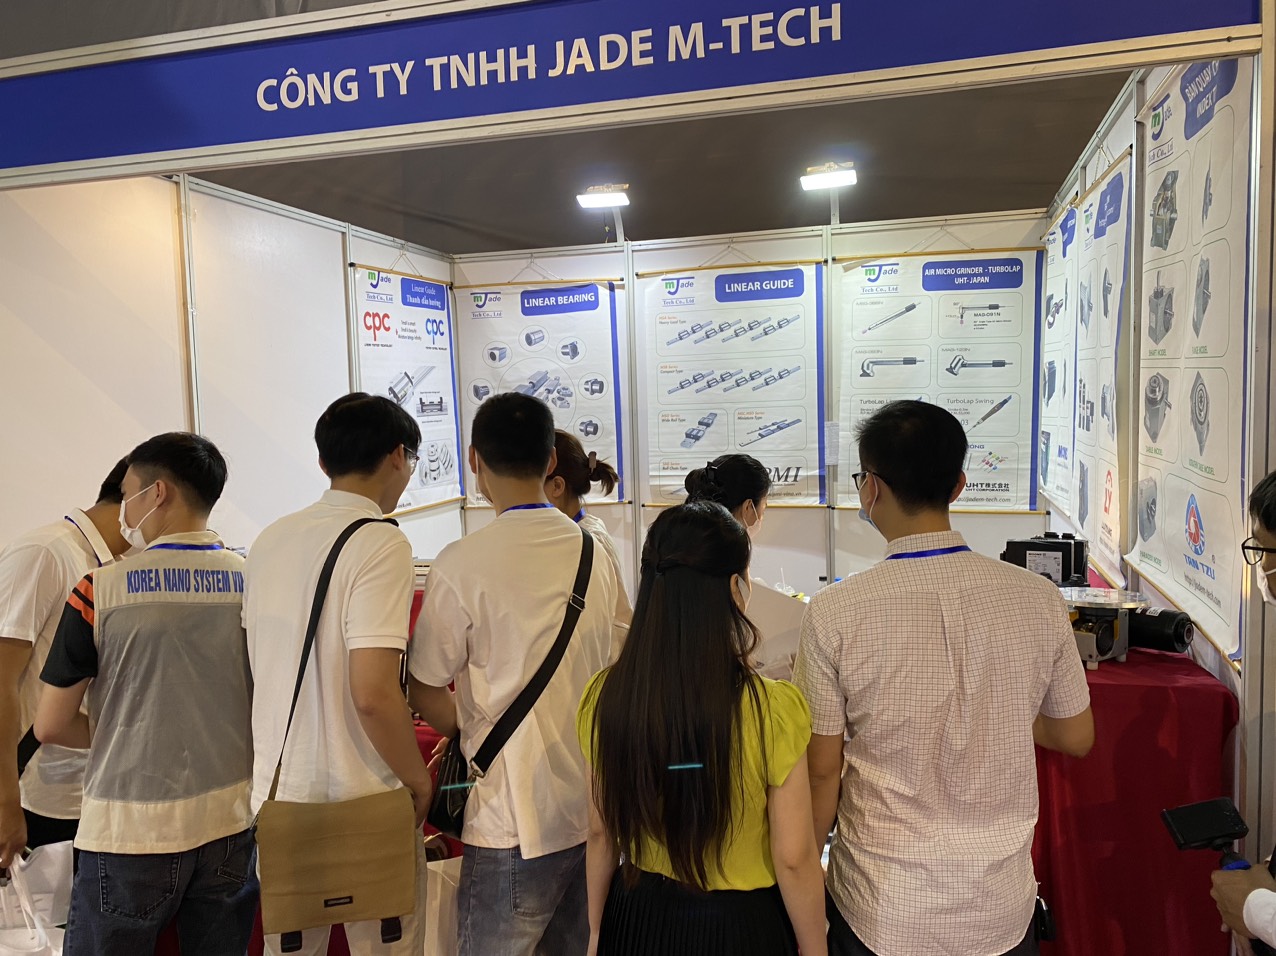 VIETNAM INDUSTRIAL AND MANUFACTURING EXHIBITION (VIMF) 2022 BAC NINH